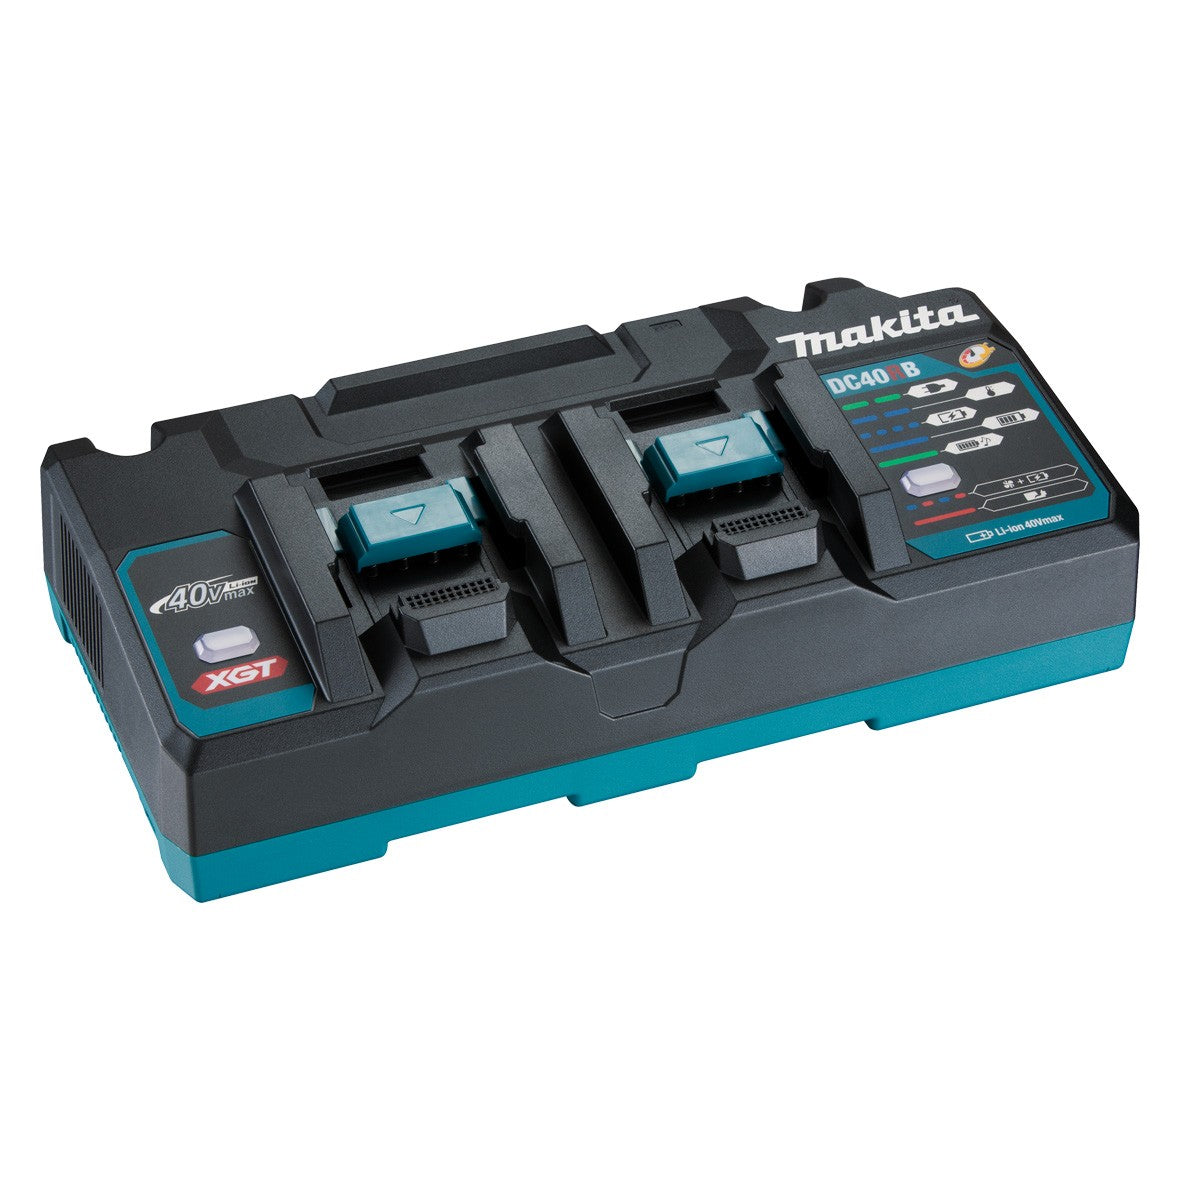 40V Max Dual Port Rapid Charger DC40RB by Makita